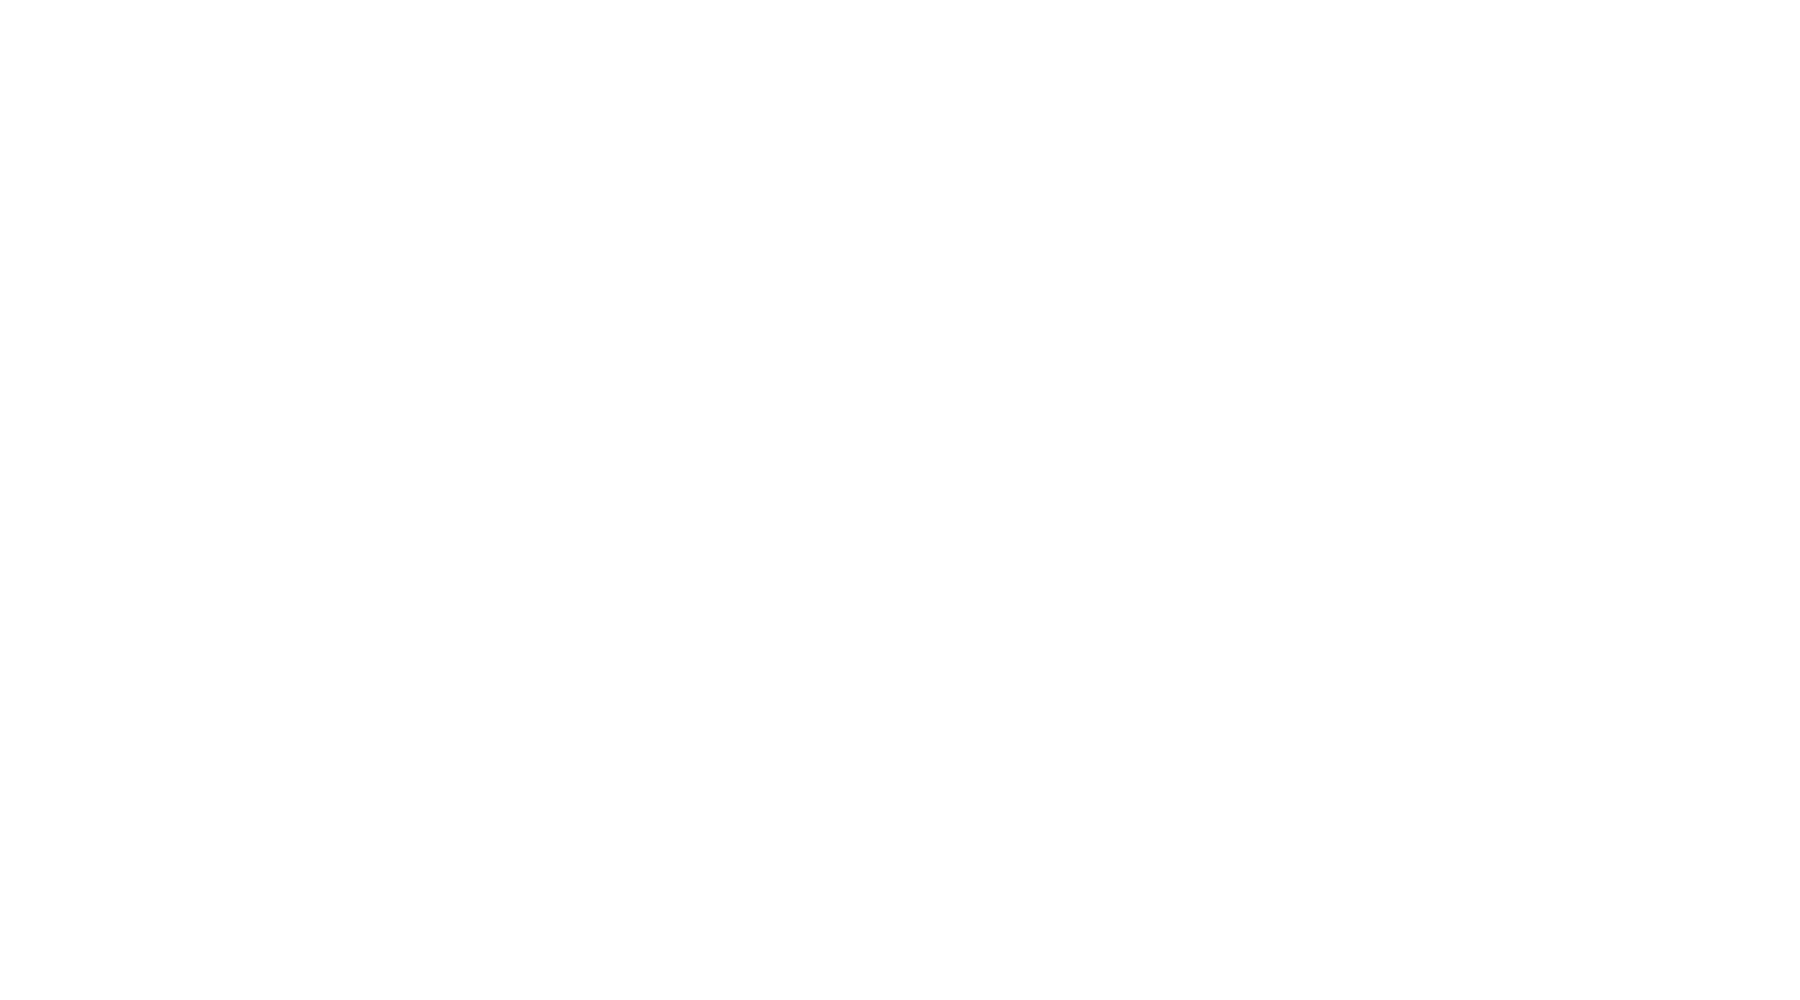 Flexi Care and Support - Achieving Better Life Outcomes